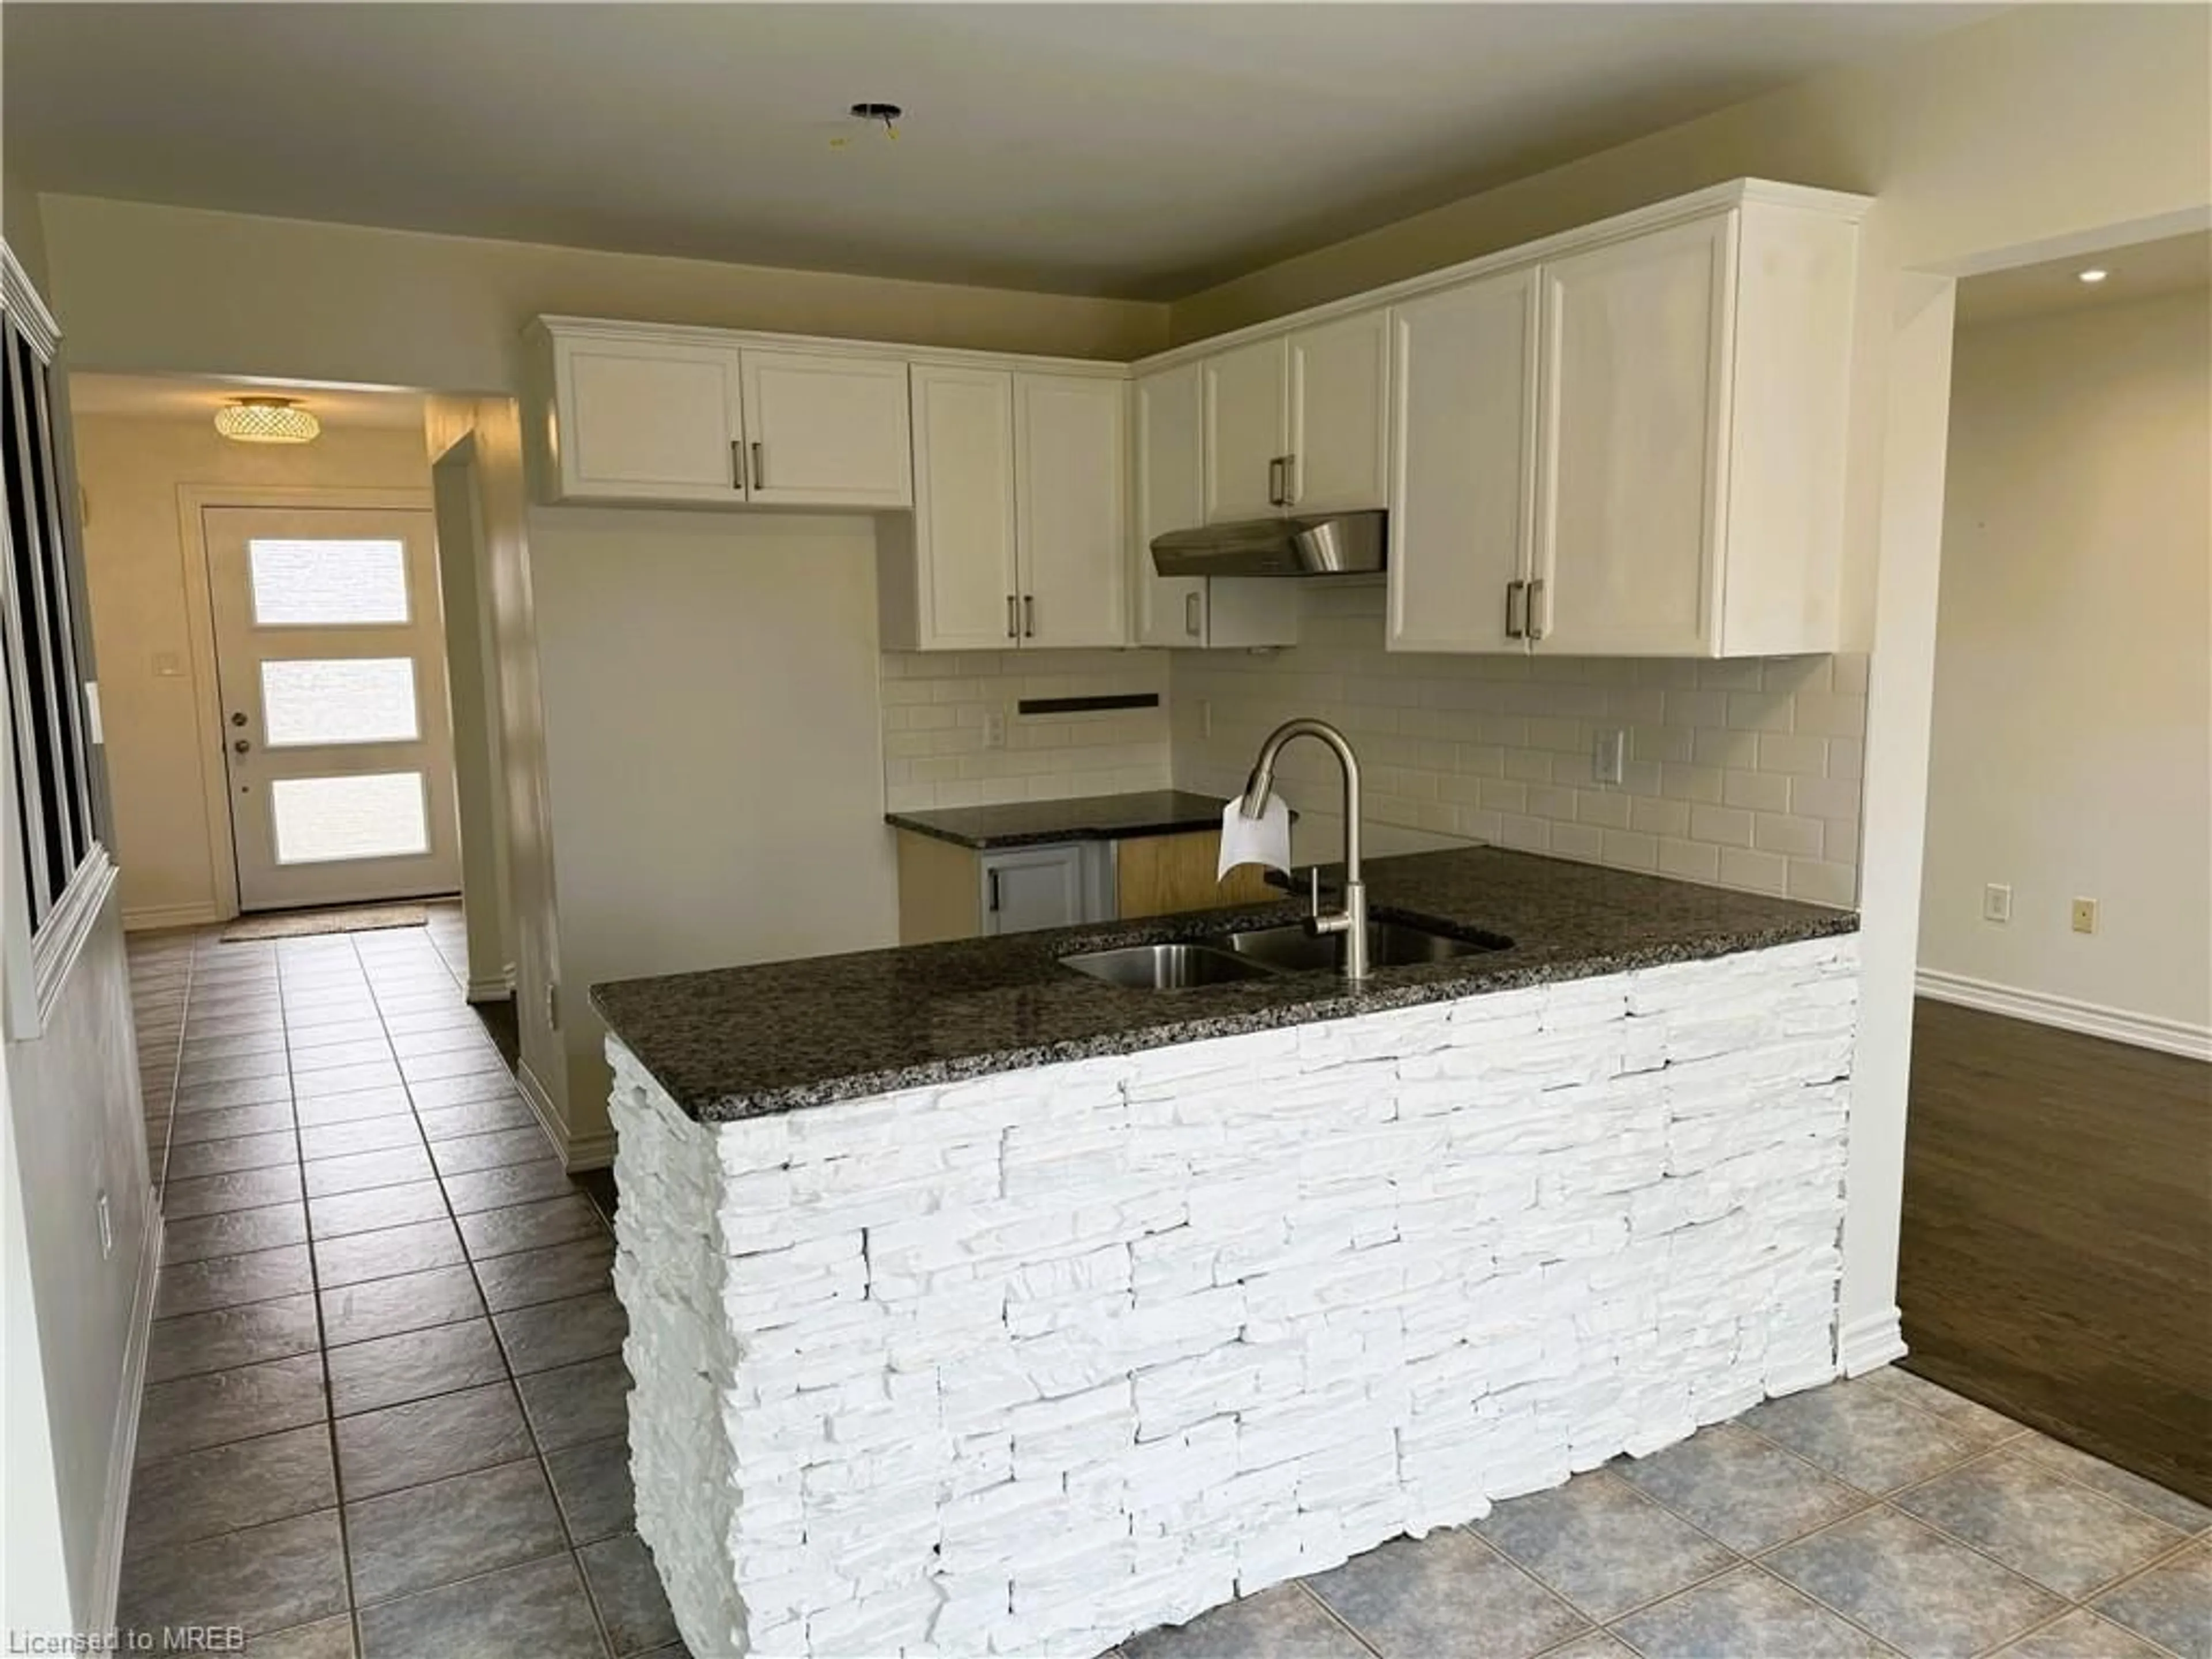 Standard kitchen for 97 Herrell Ave, Barrie Ontario L4N 6T9